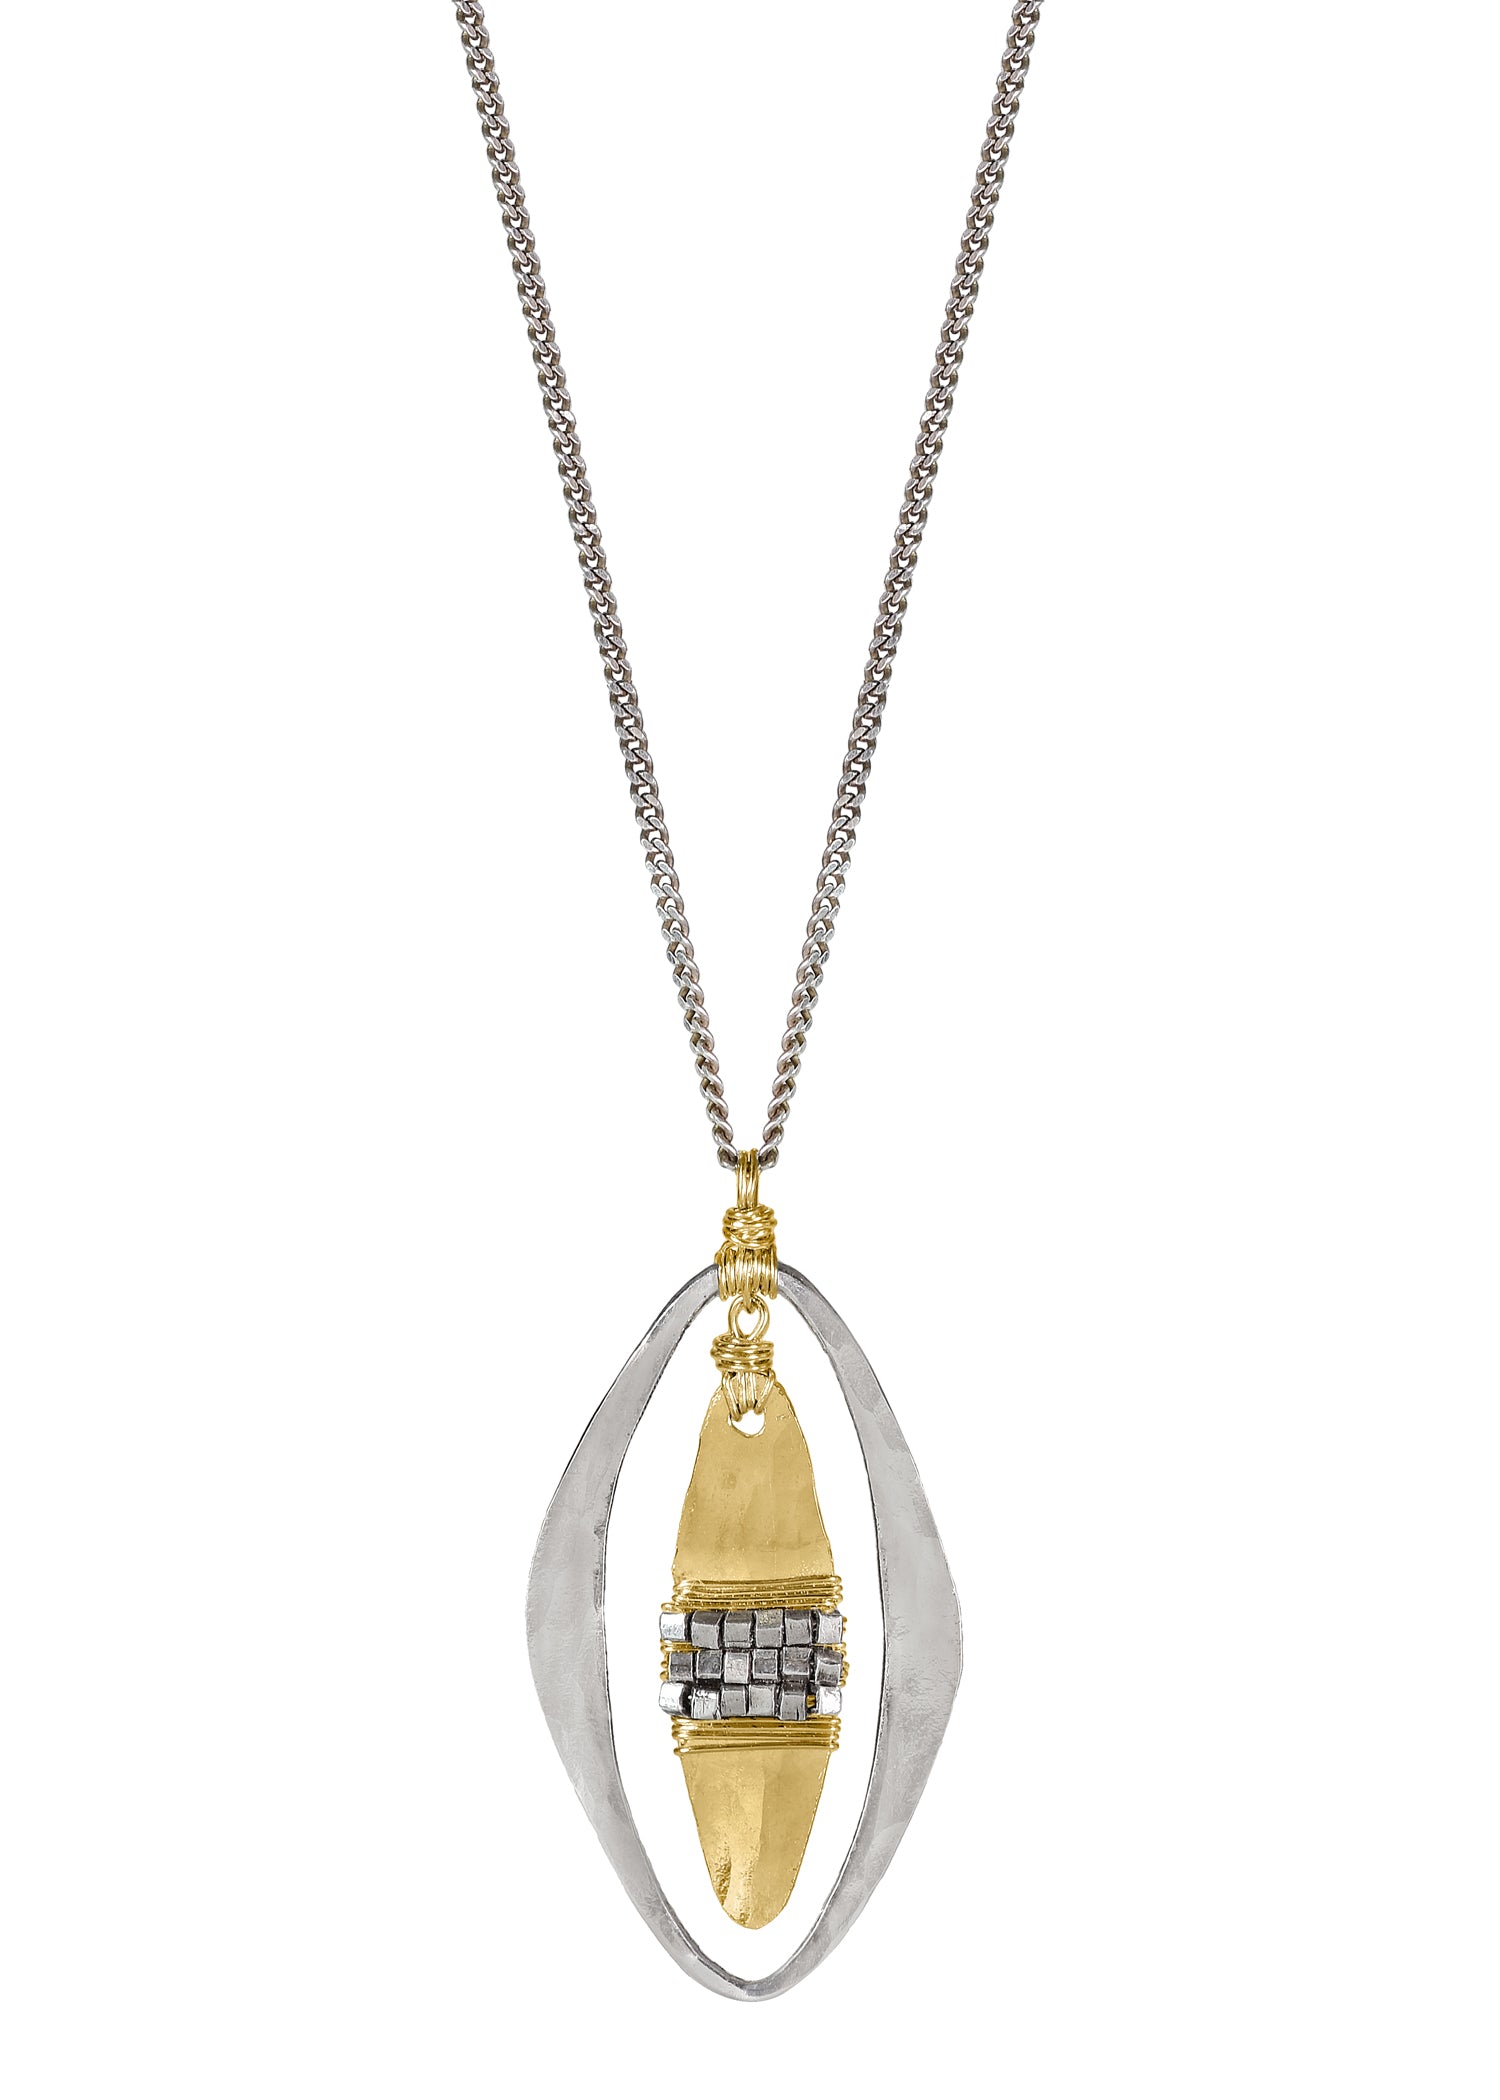 14k gold fill Sterling silver Necklace measures 17-1/8" in length Pendant measures 1" in length and 5/8" in width at the widest point Handmade in our Los Angeles studio